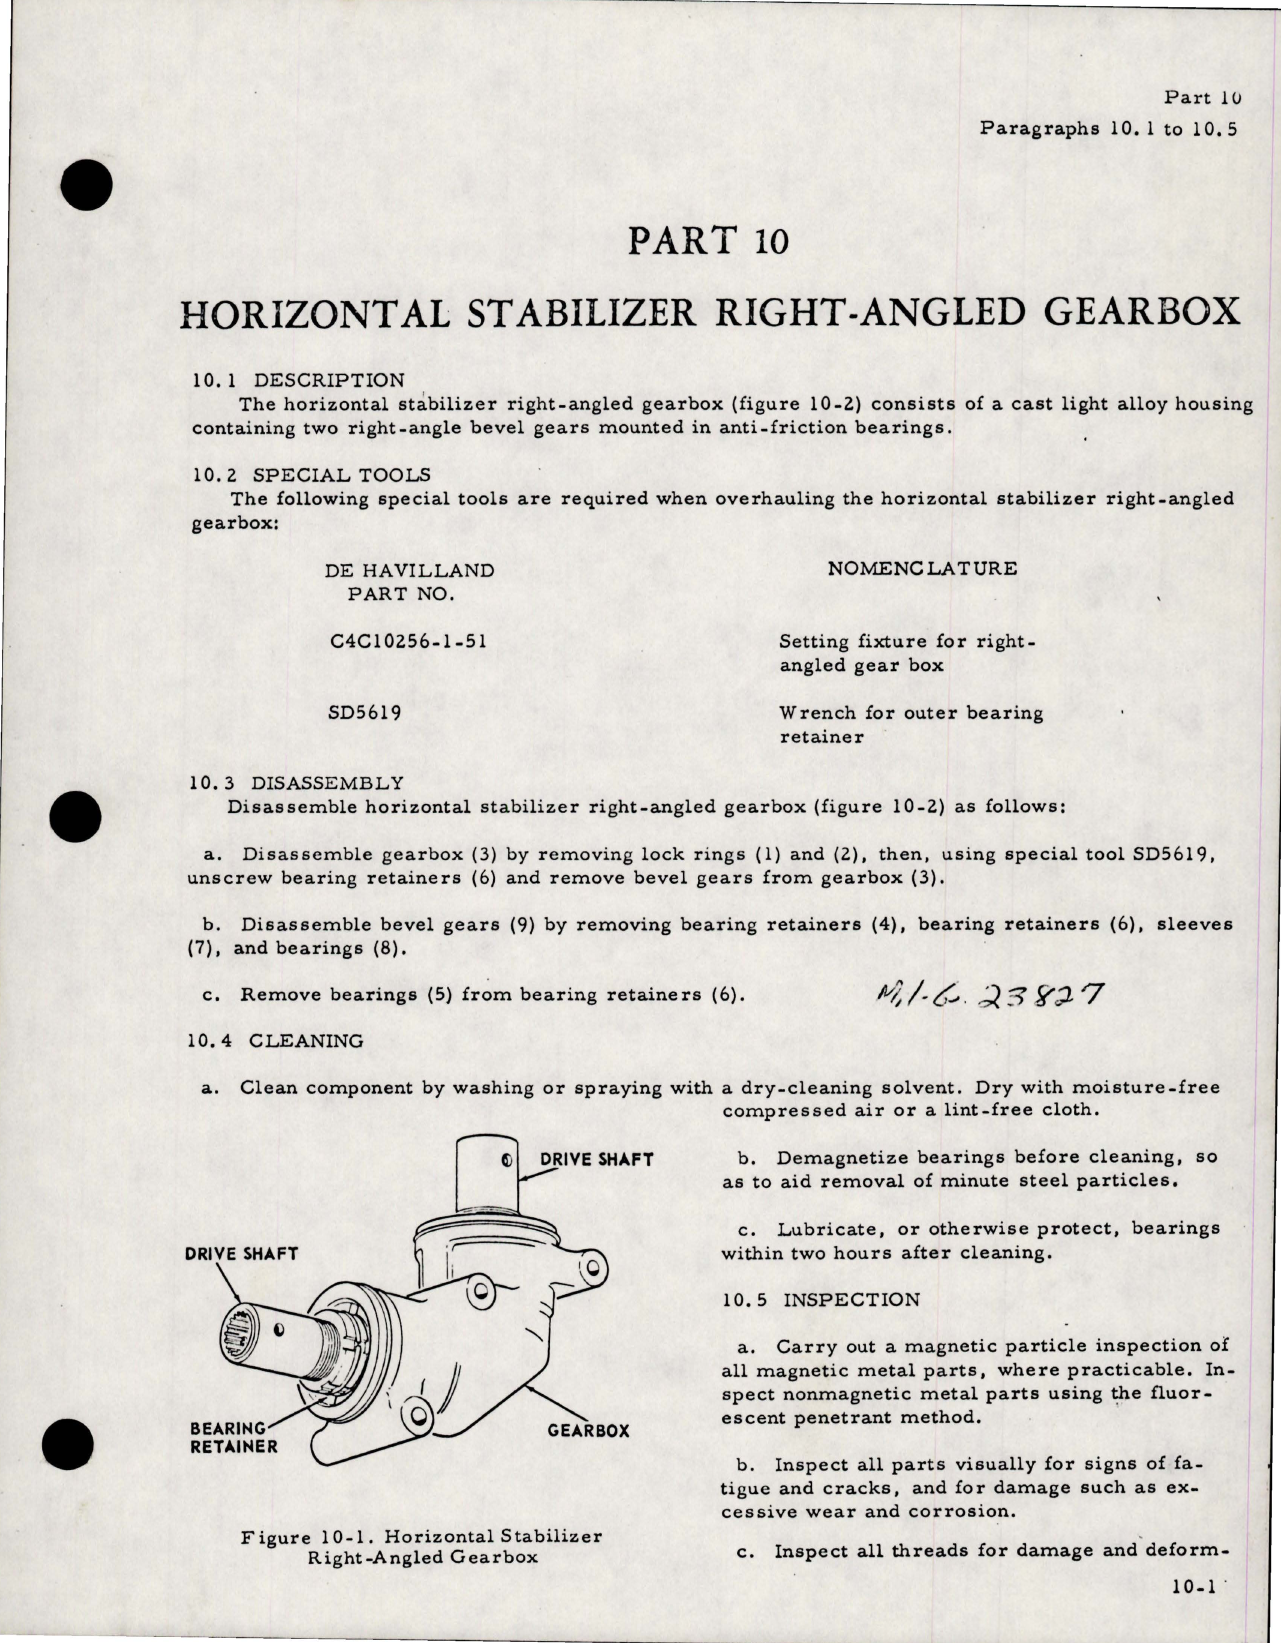 Sample page 1 from AirCorps Library document: Horizontal Stabilizer Right-Angled Gearbox - Part C4C10256-1-51